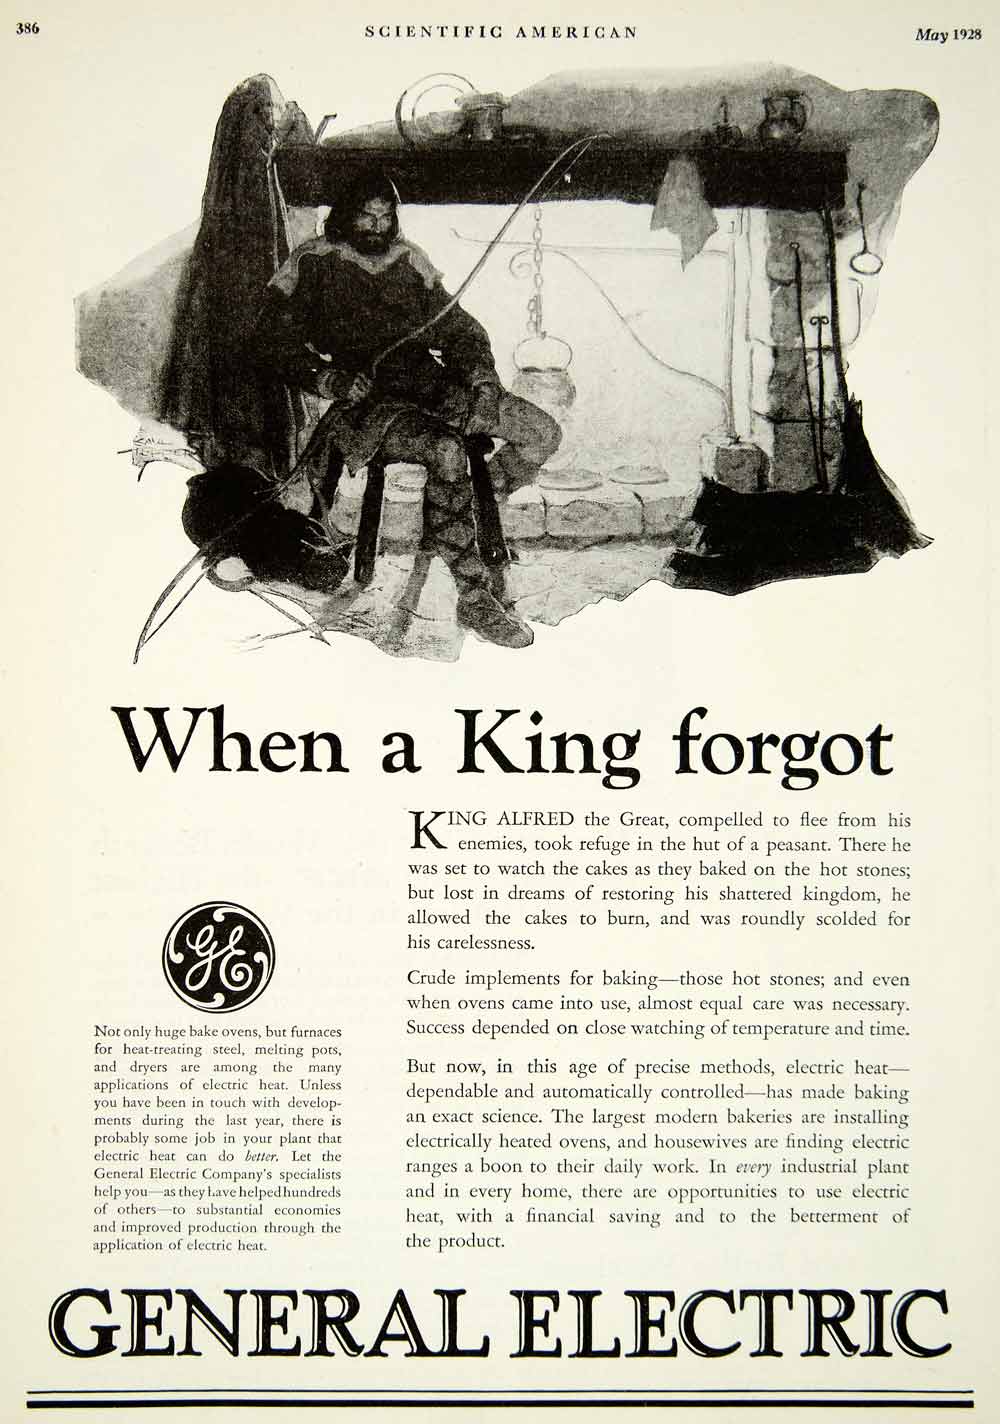 1928 Ad General Electric King Alfred Great Electricity Peasant SCA6